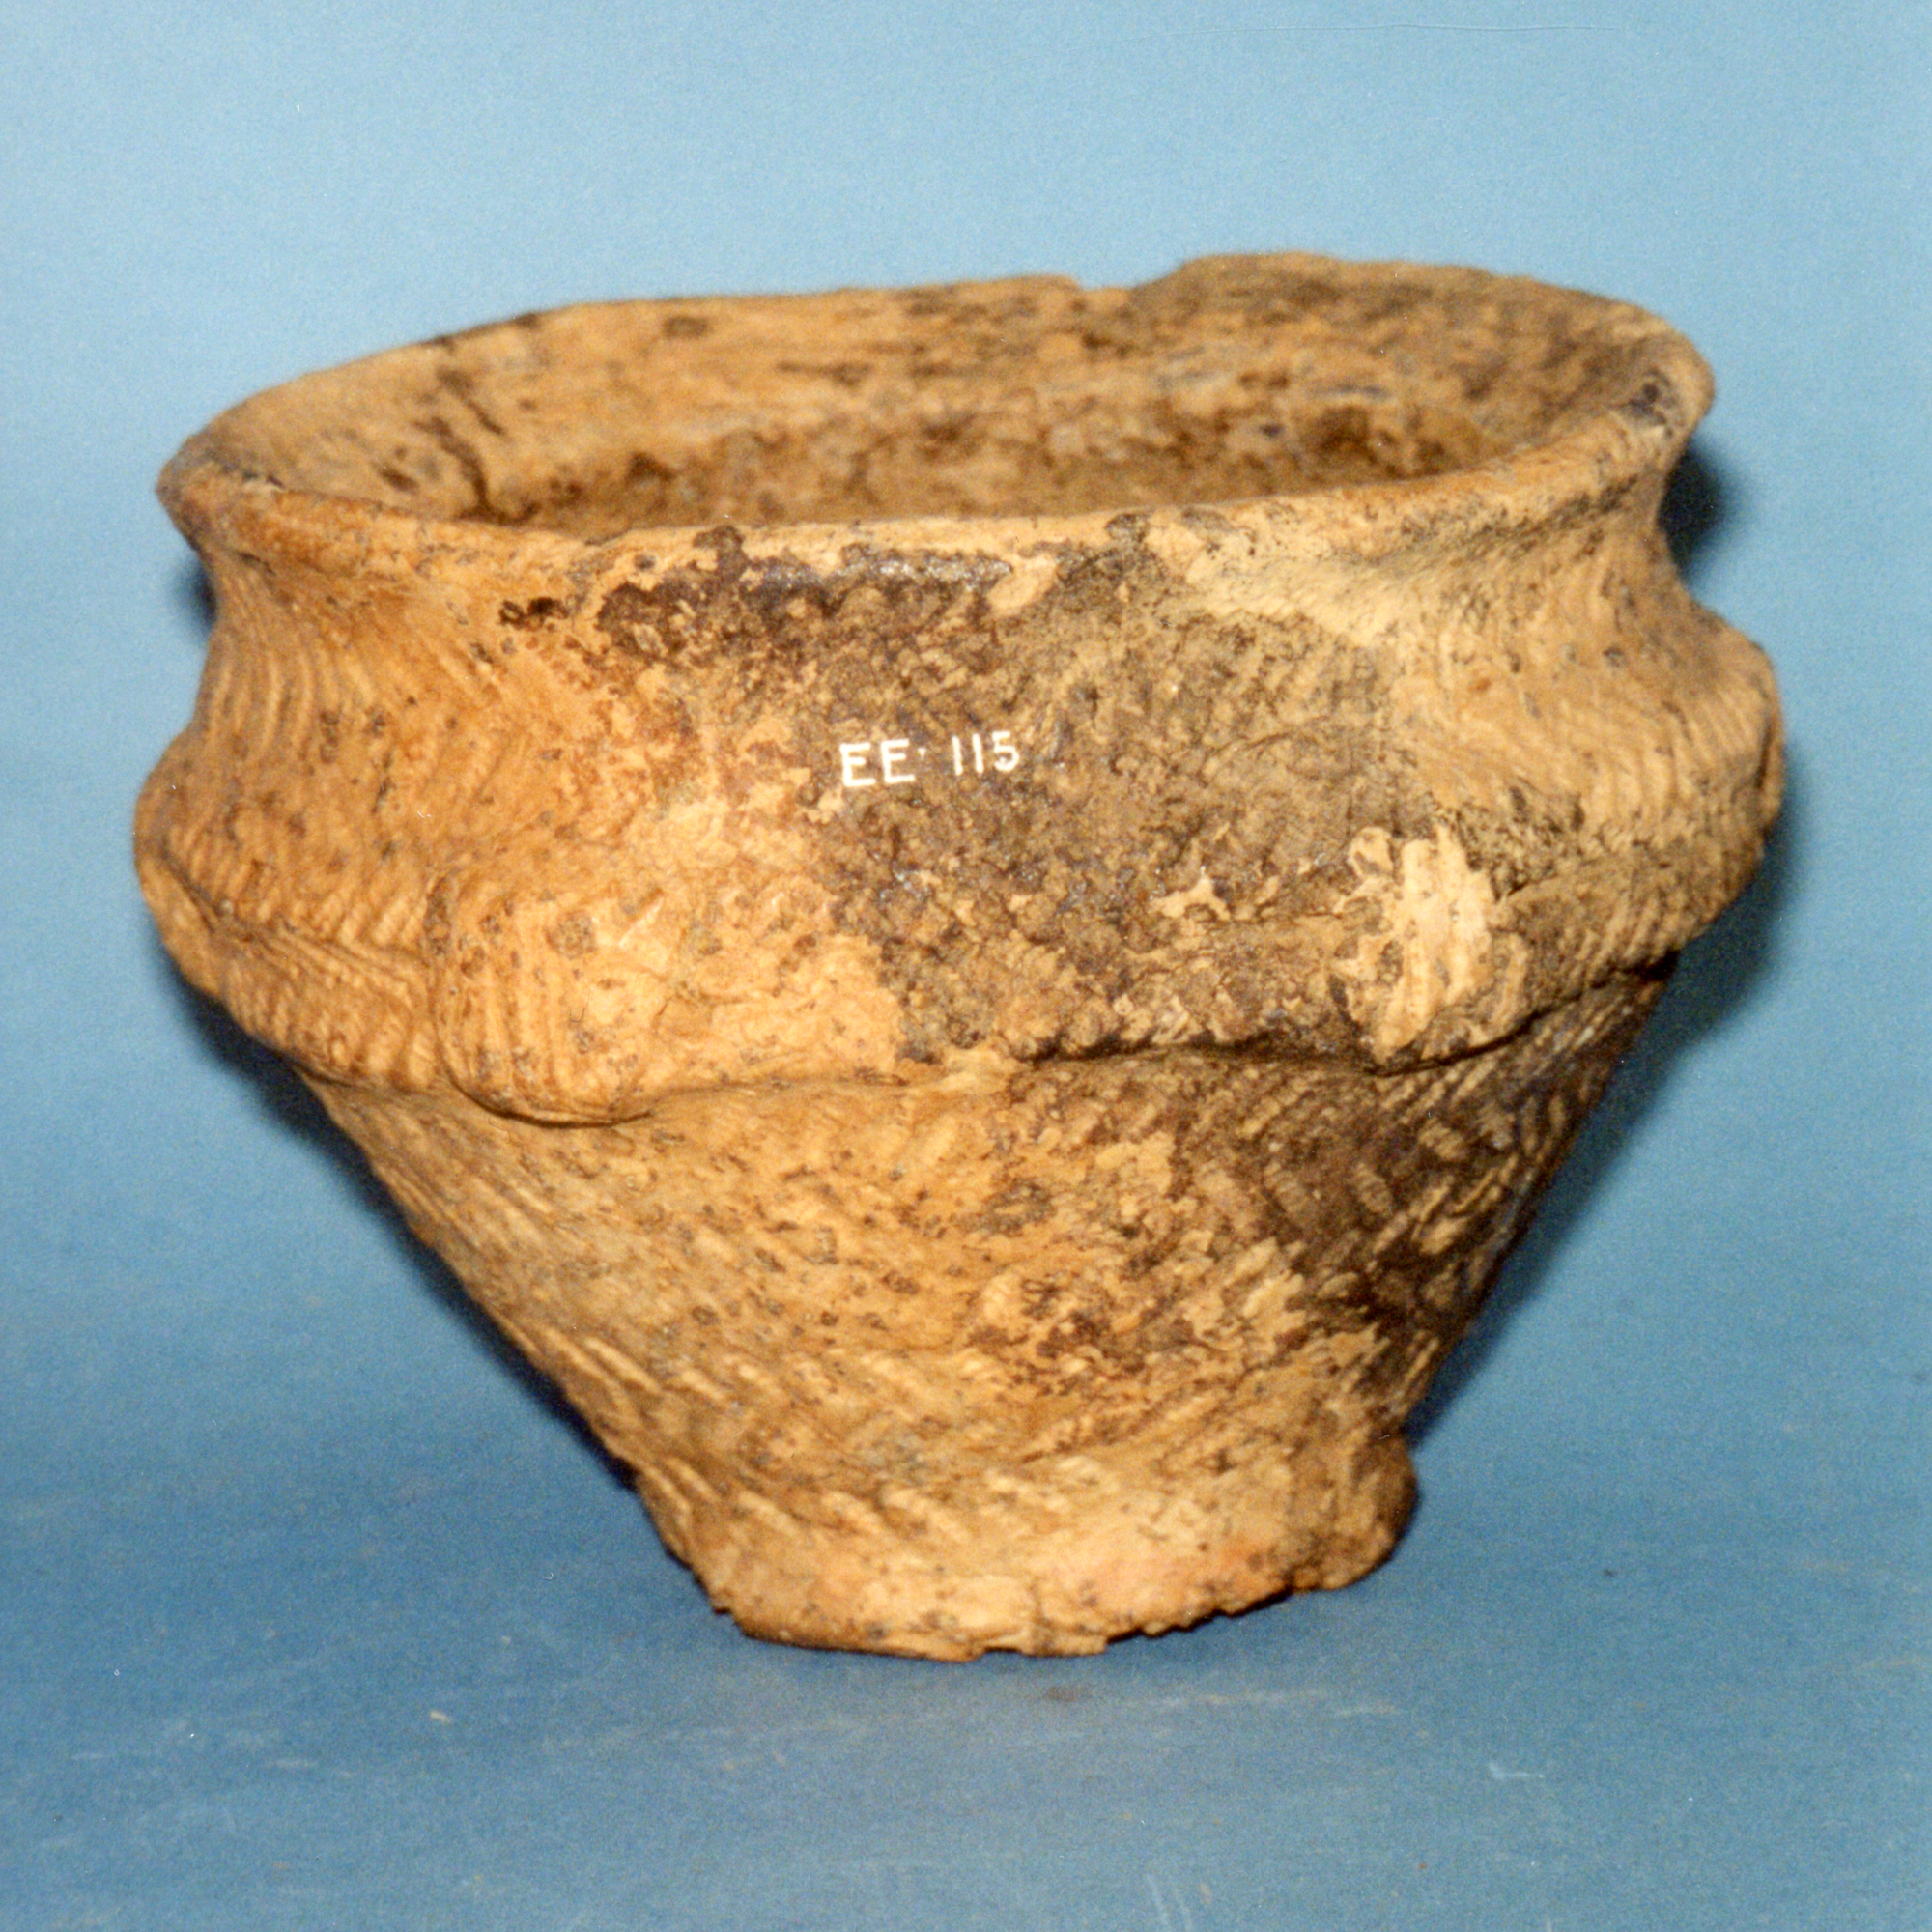 Image of Pottery food vessel from a cist at Beley Farm, Dunino, Fife © National Museums Scotland